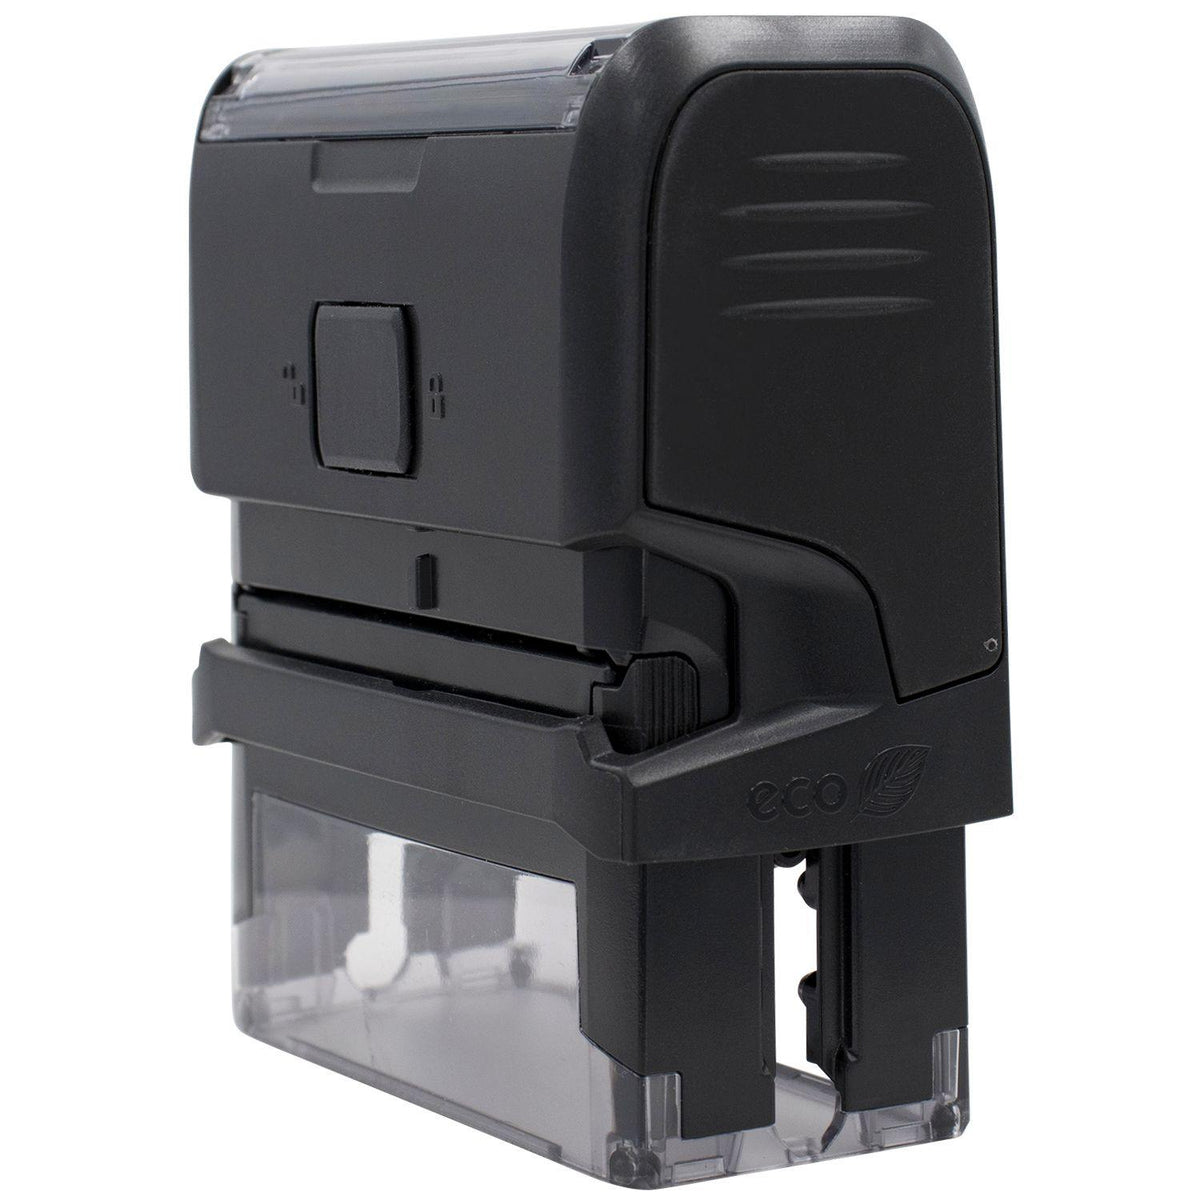 Self-Inking Copia Stamp - Engineer Seal Stamps - Brand_Trodat, Impression Size_Small, Stamp Type_Self-Inking Stamp, Type of Use_General, Type of Use_Office